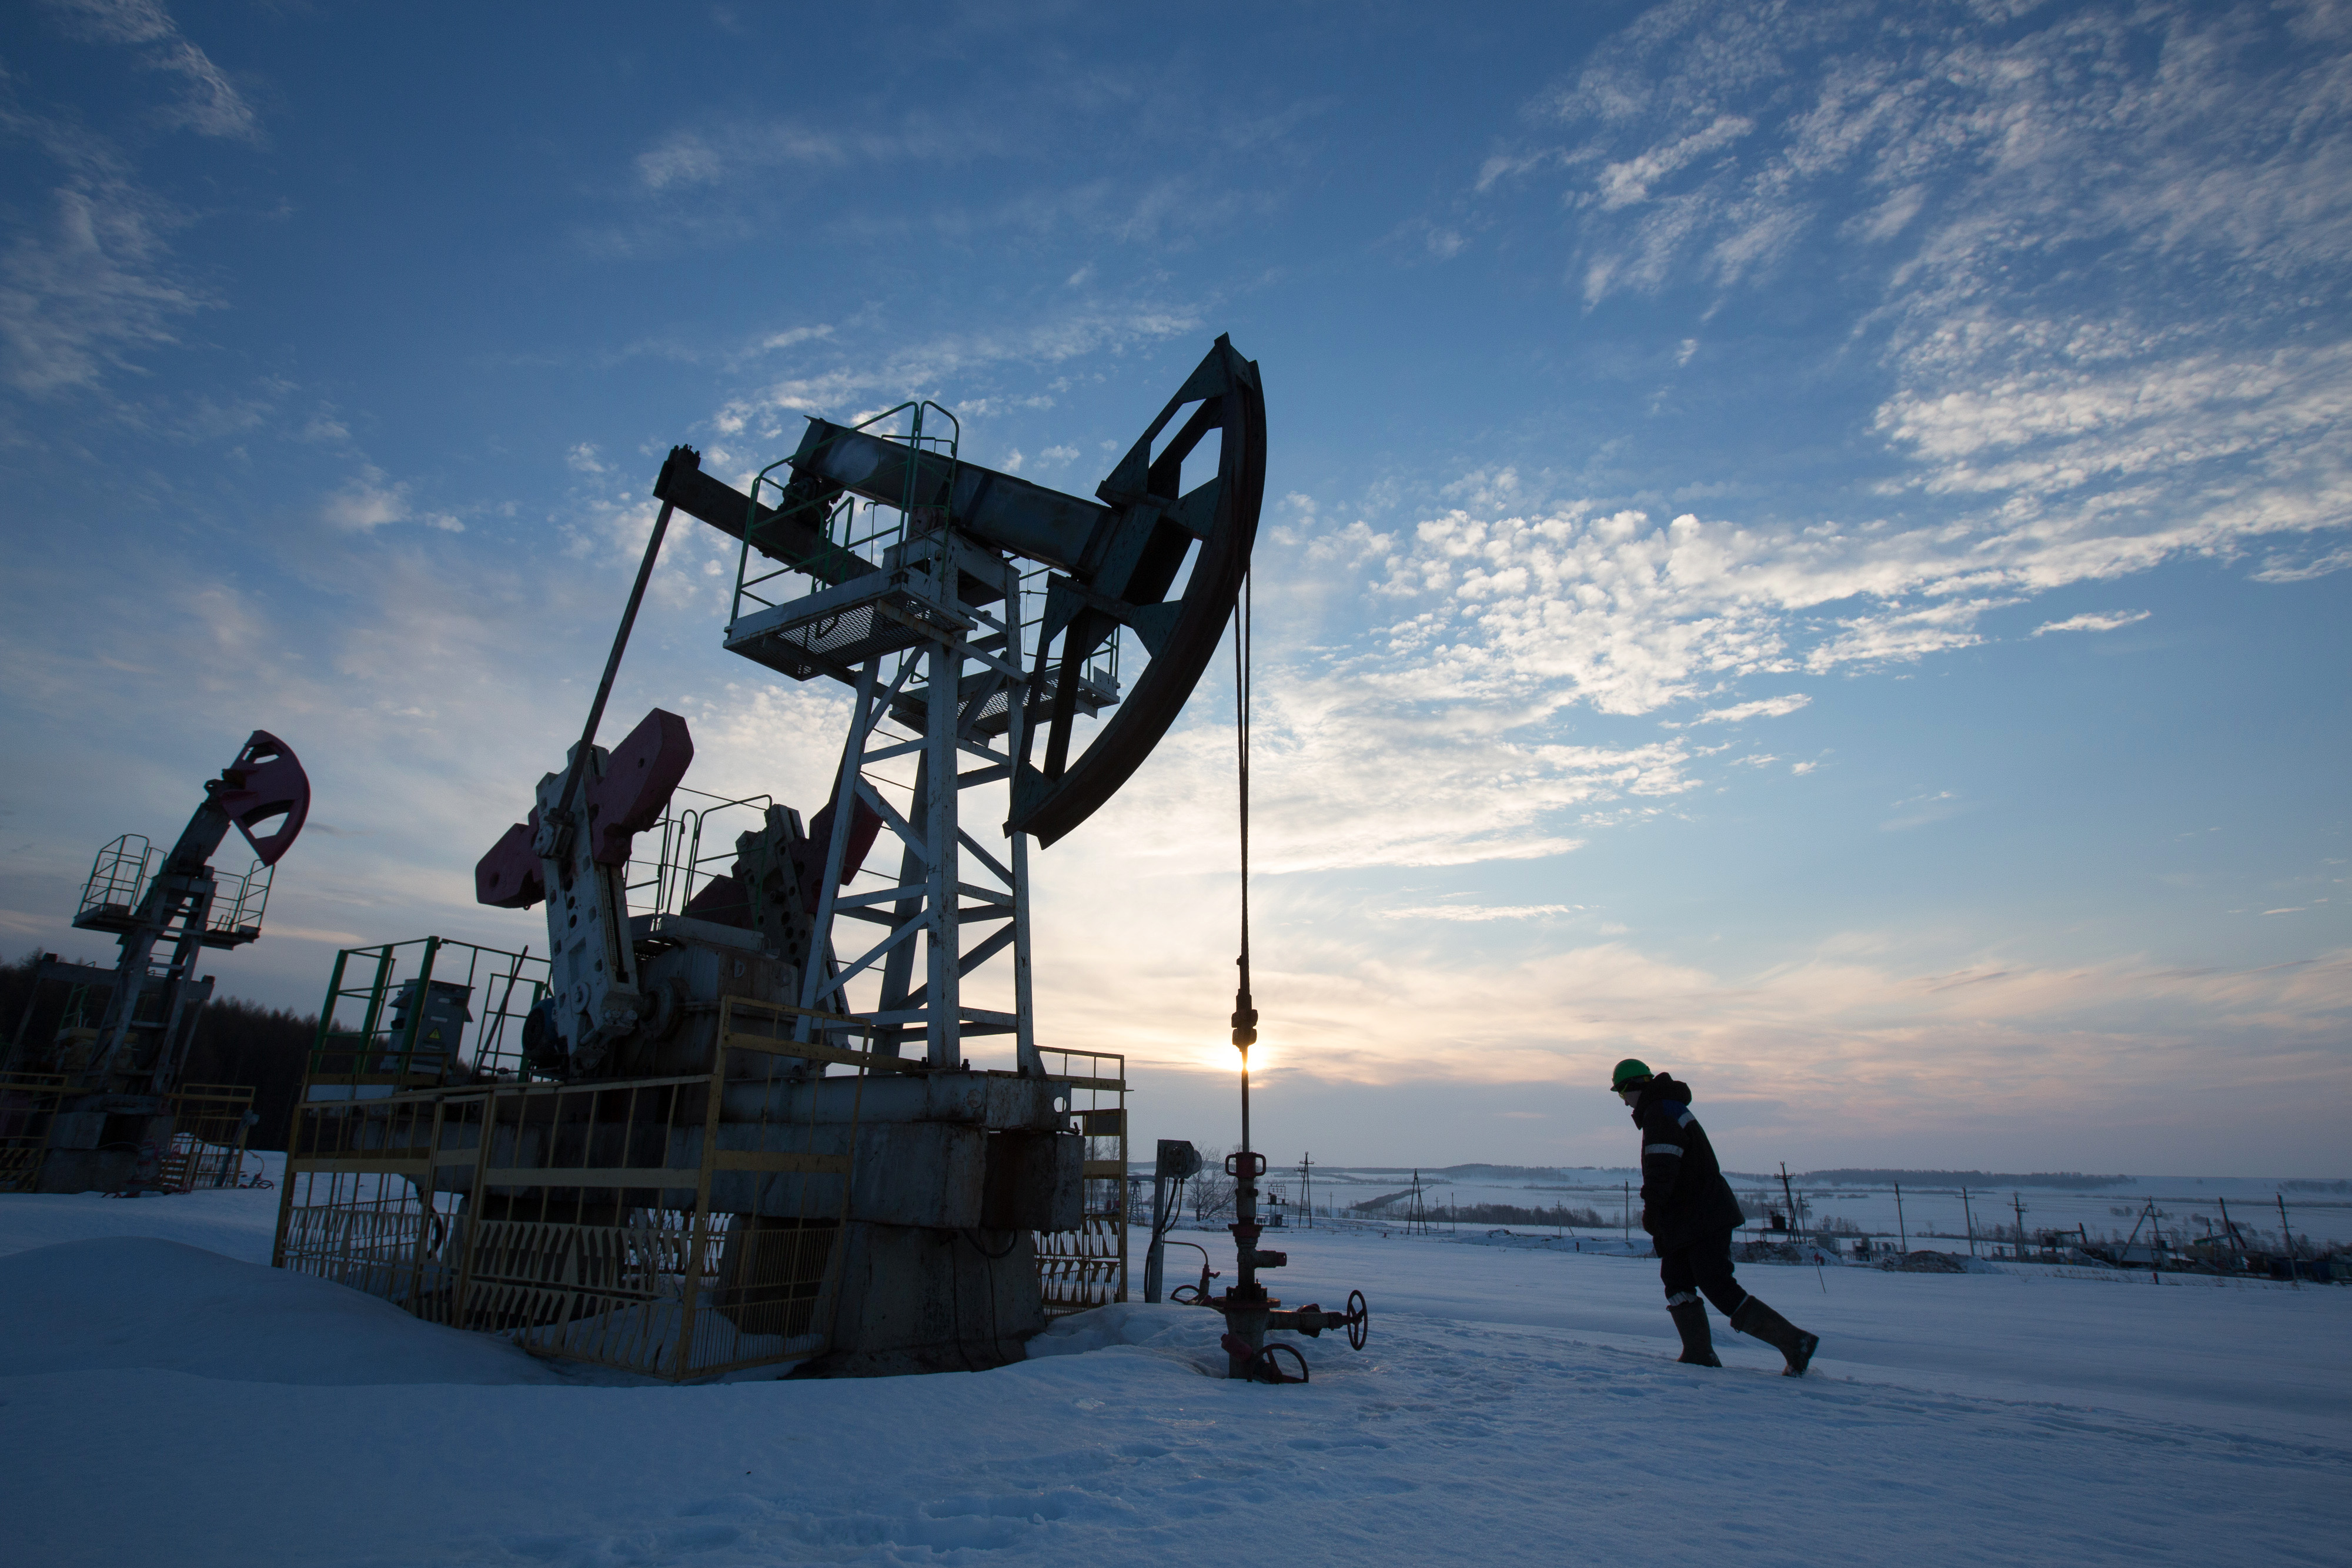 Russian Oil Drilling Platform As Specter Of $20 Oil Recedes